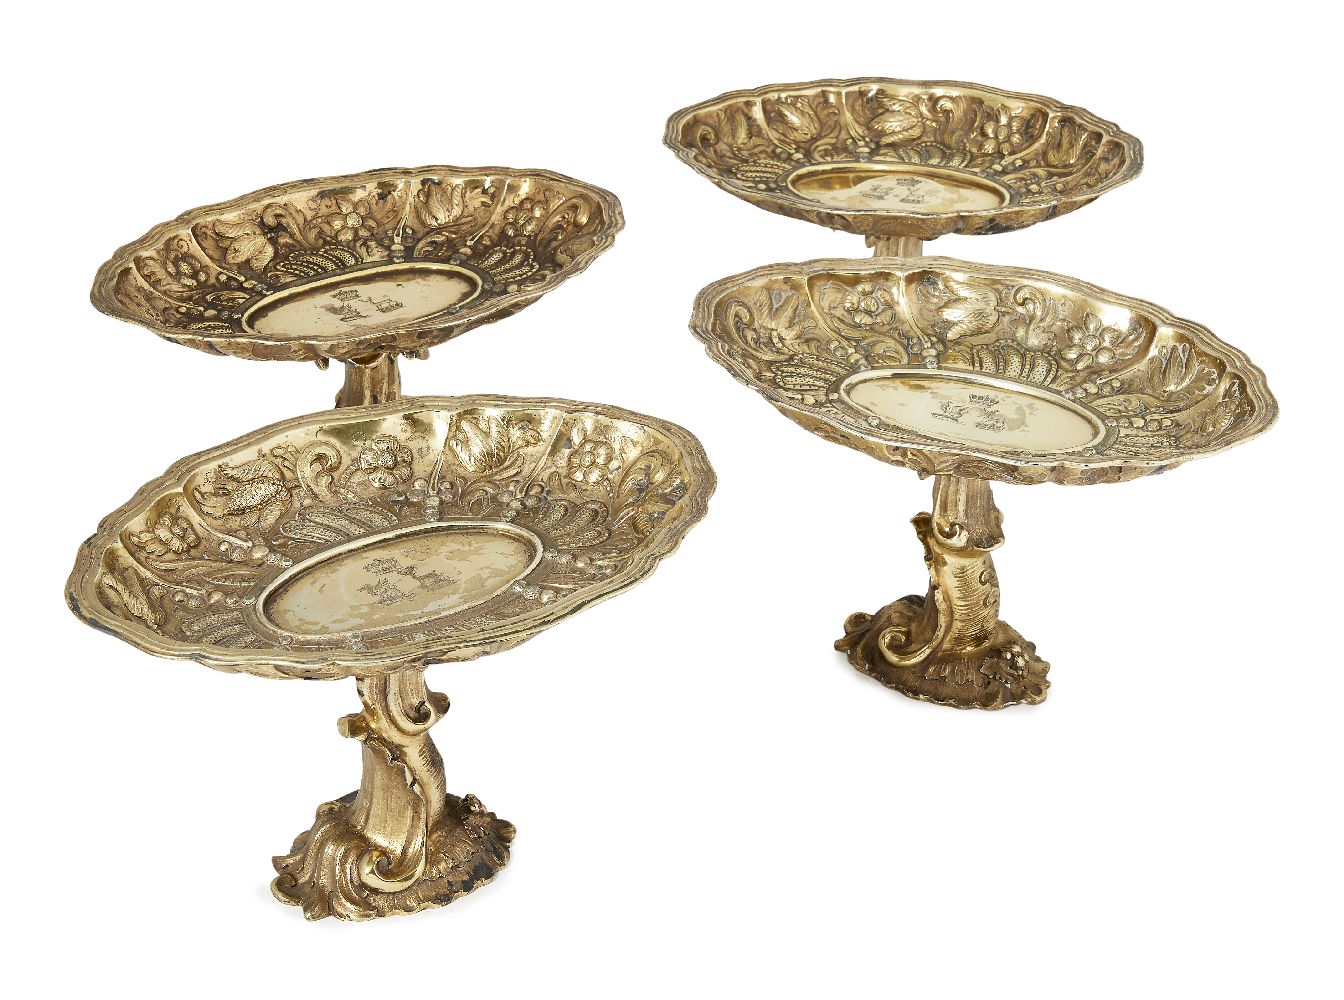 A set of four early Victorian silver-gilt tazza, London c.1845, Charles Thomas Fox and George Fox,